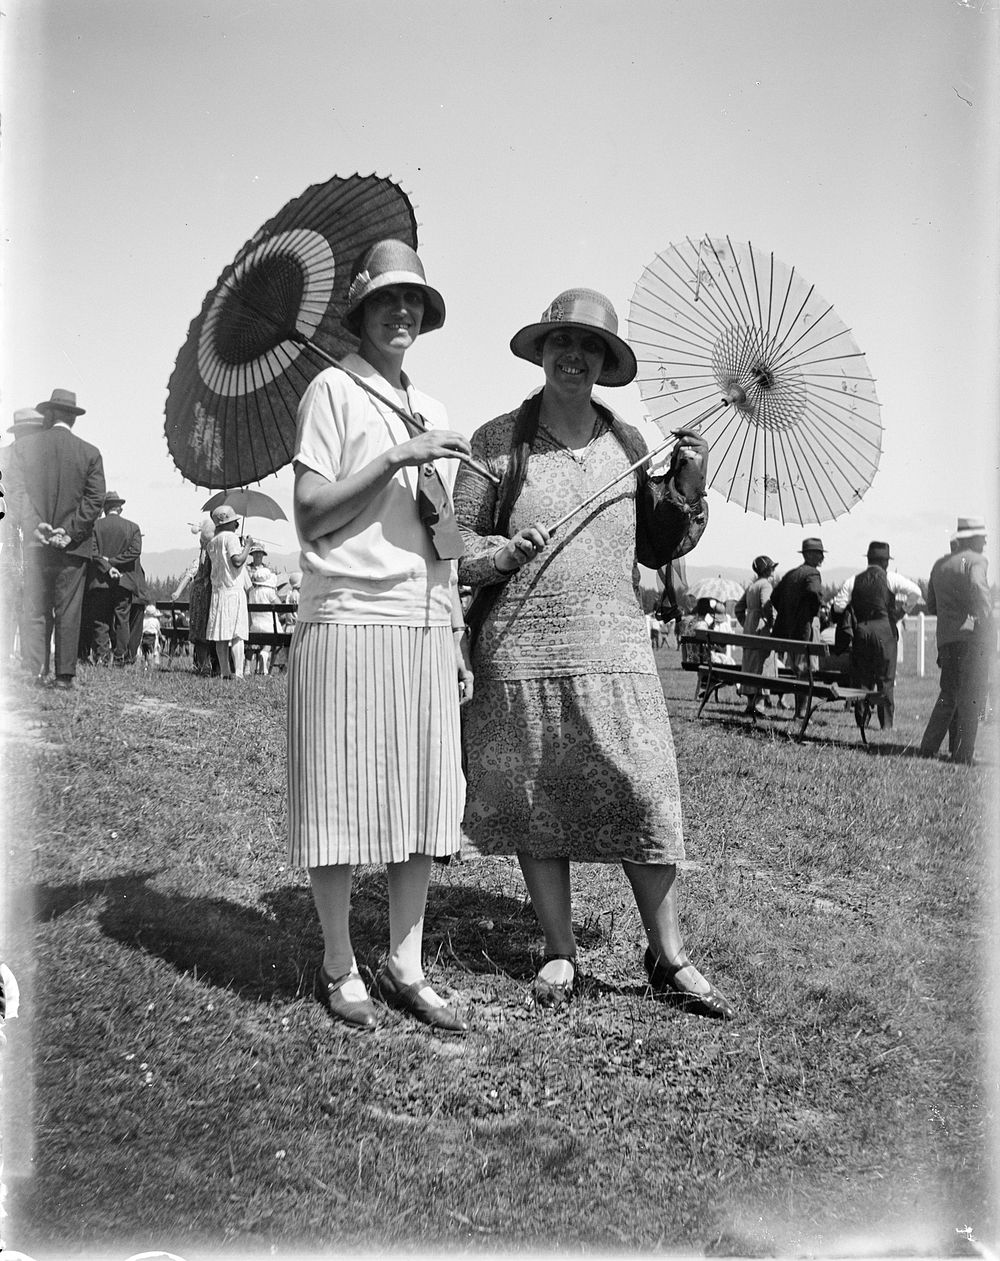 Two women with parasols (circa 1925) by Leslie Adkin.